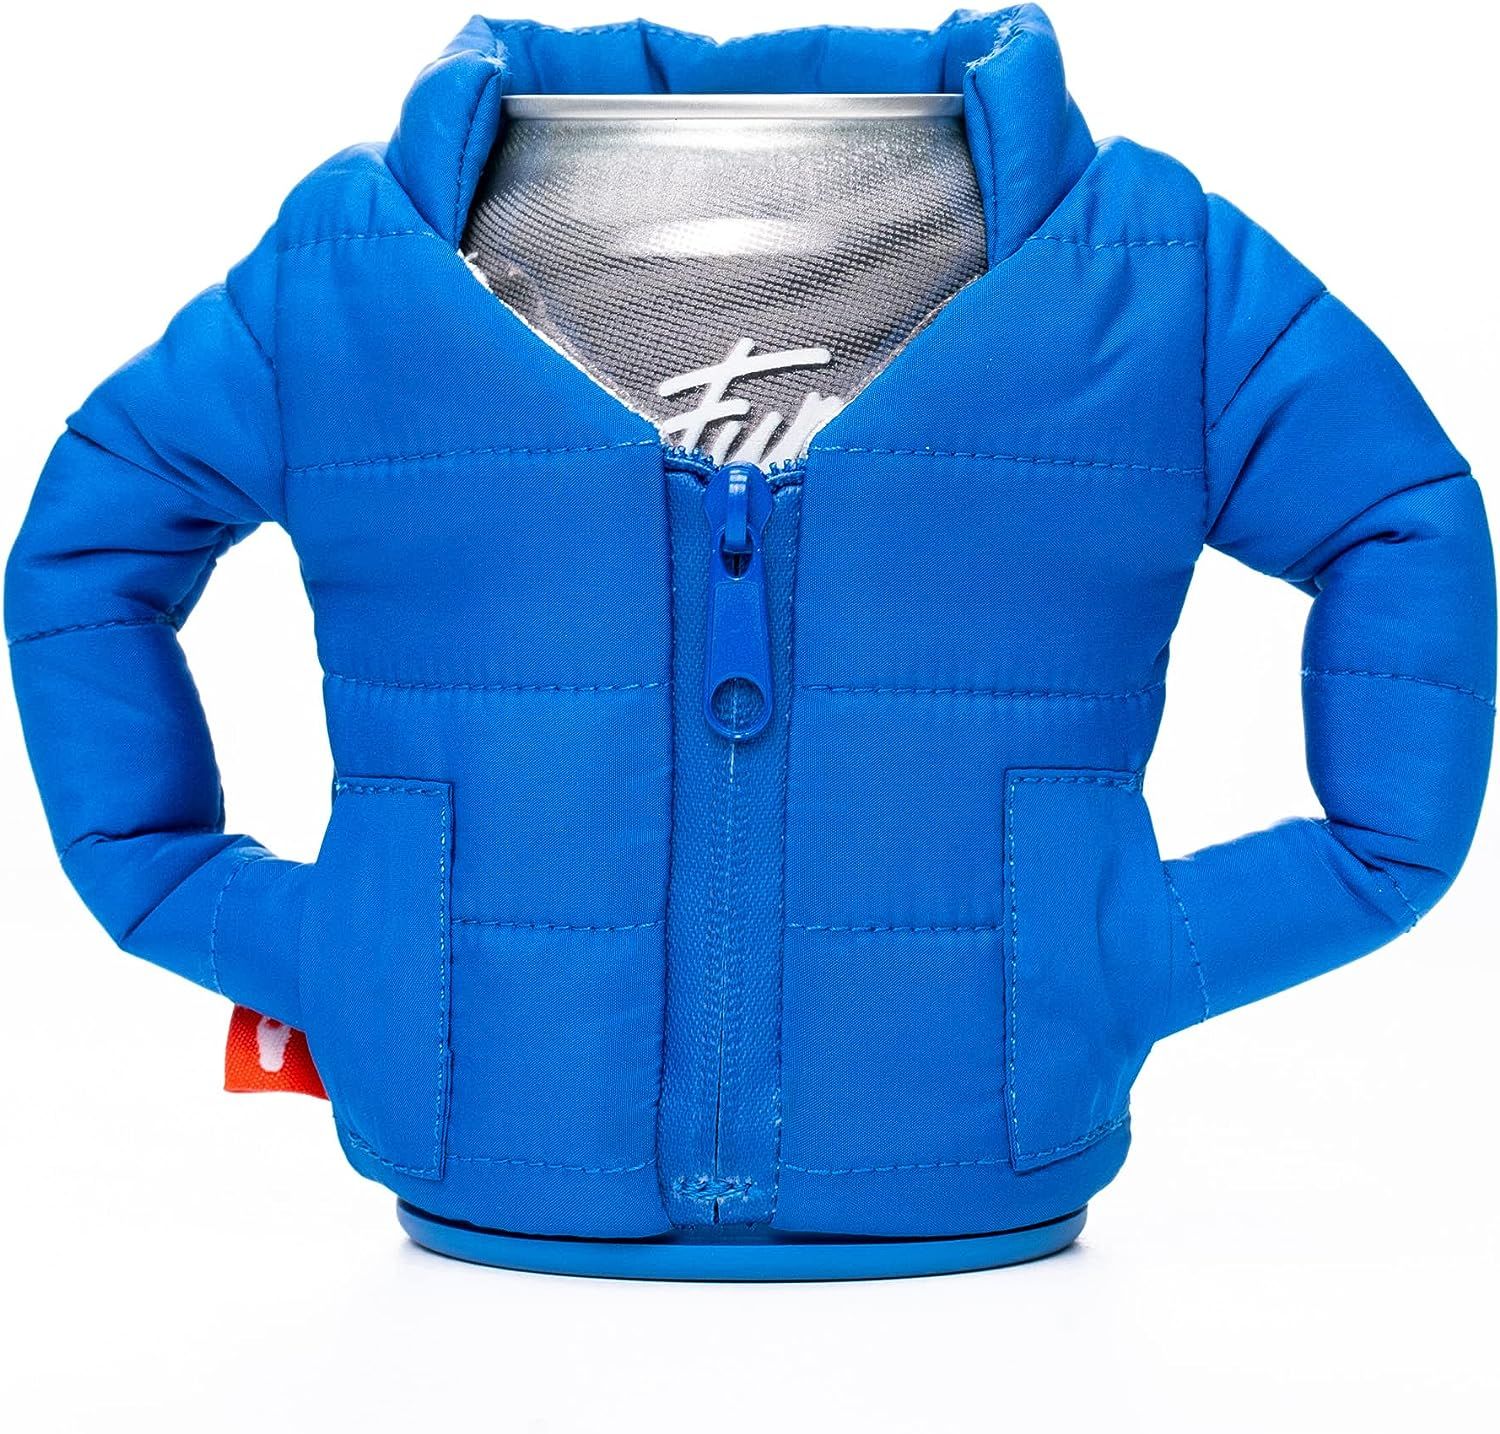 Puffin - The Puffy Beverage Jacket, Insulated Can Cooler, Varsity Blue | Amazon (US)